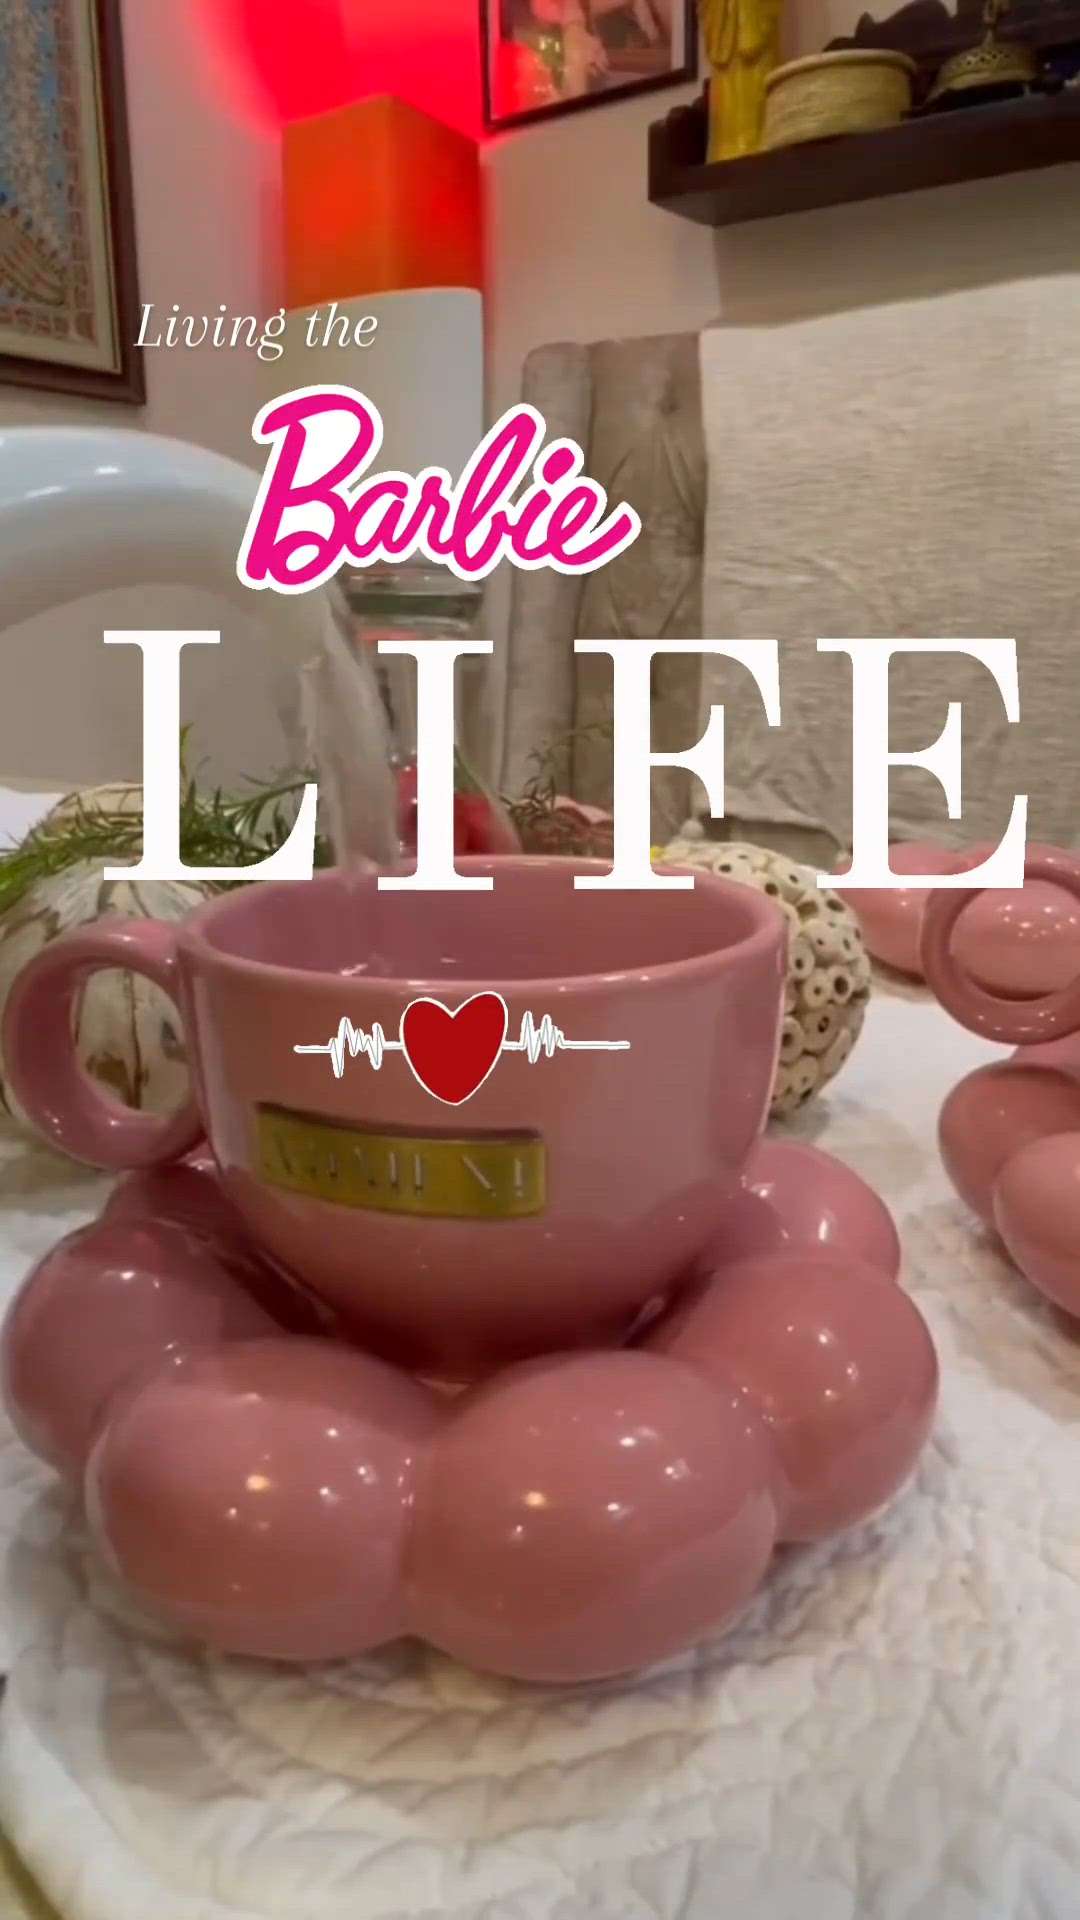 Loved this Score ,took me back to my childhood days !

Talking of which did you check these amazing cup and saucer sets

@theartment#WeekendMood#barbie#explore_yourdecor51#explore_yourdecor#ourcreative_nesting#barbietheme#cupandsaucer#happysunday #decorshopping